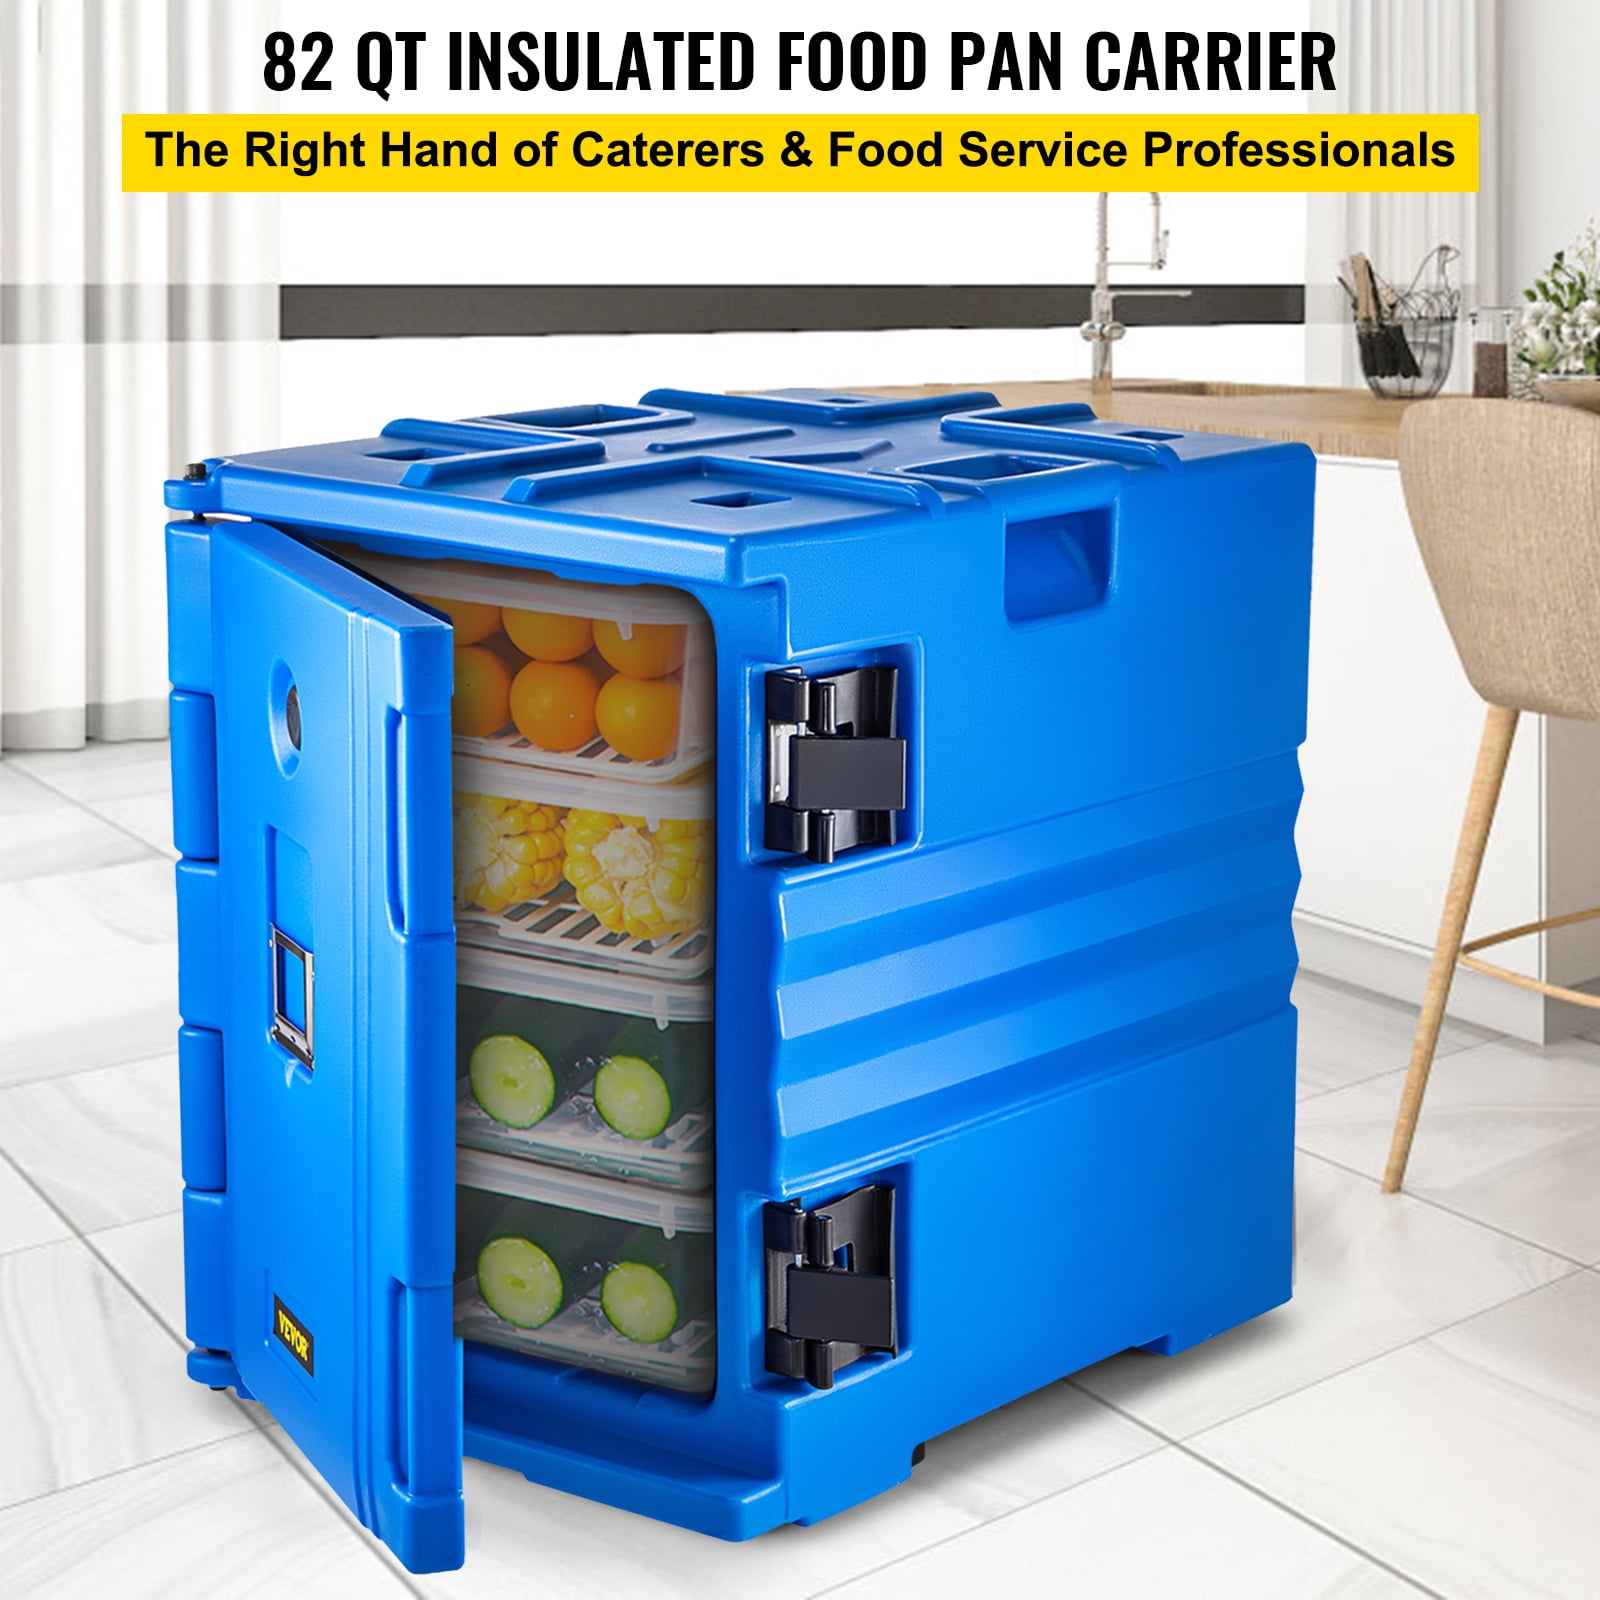 VEVOR Insulated Food Pan Carrier 82 Qt. Hot Box for Catering Food